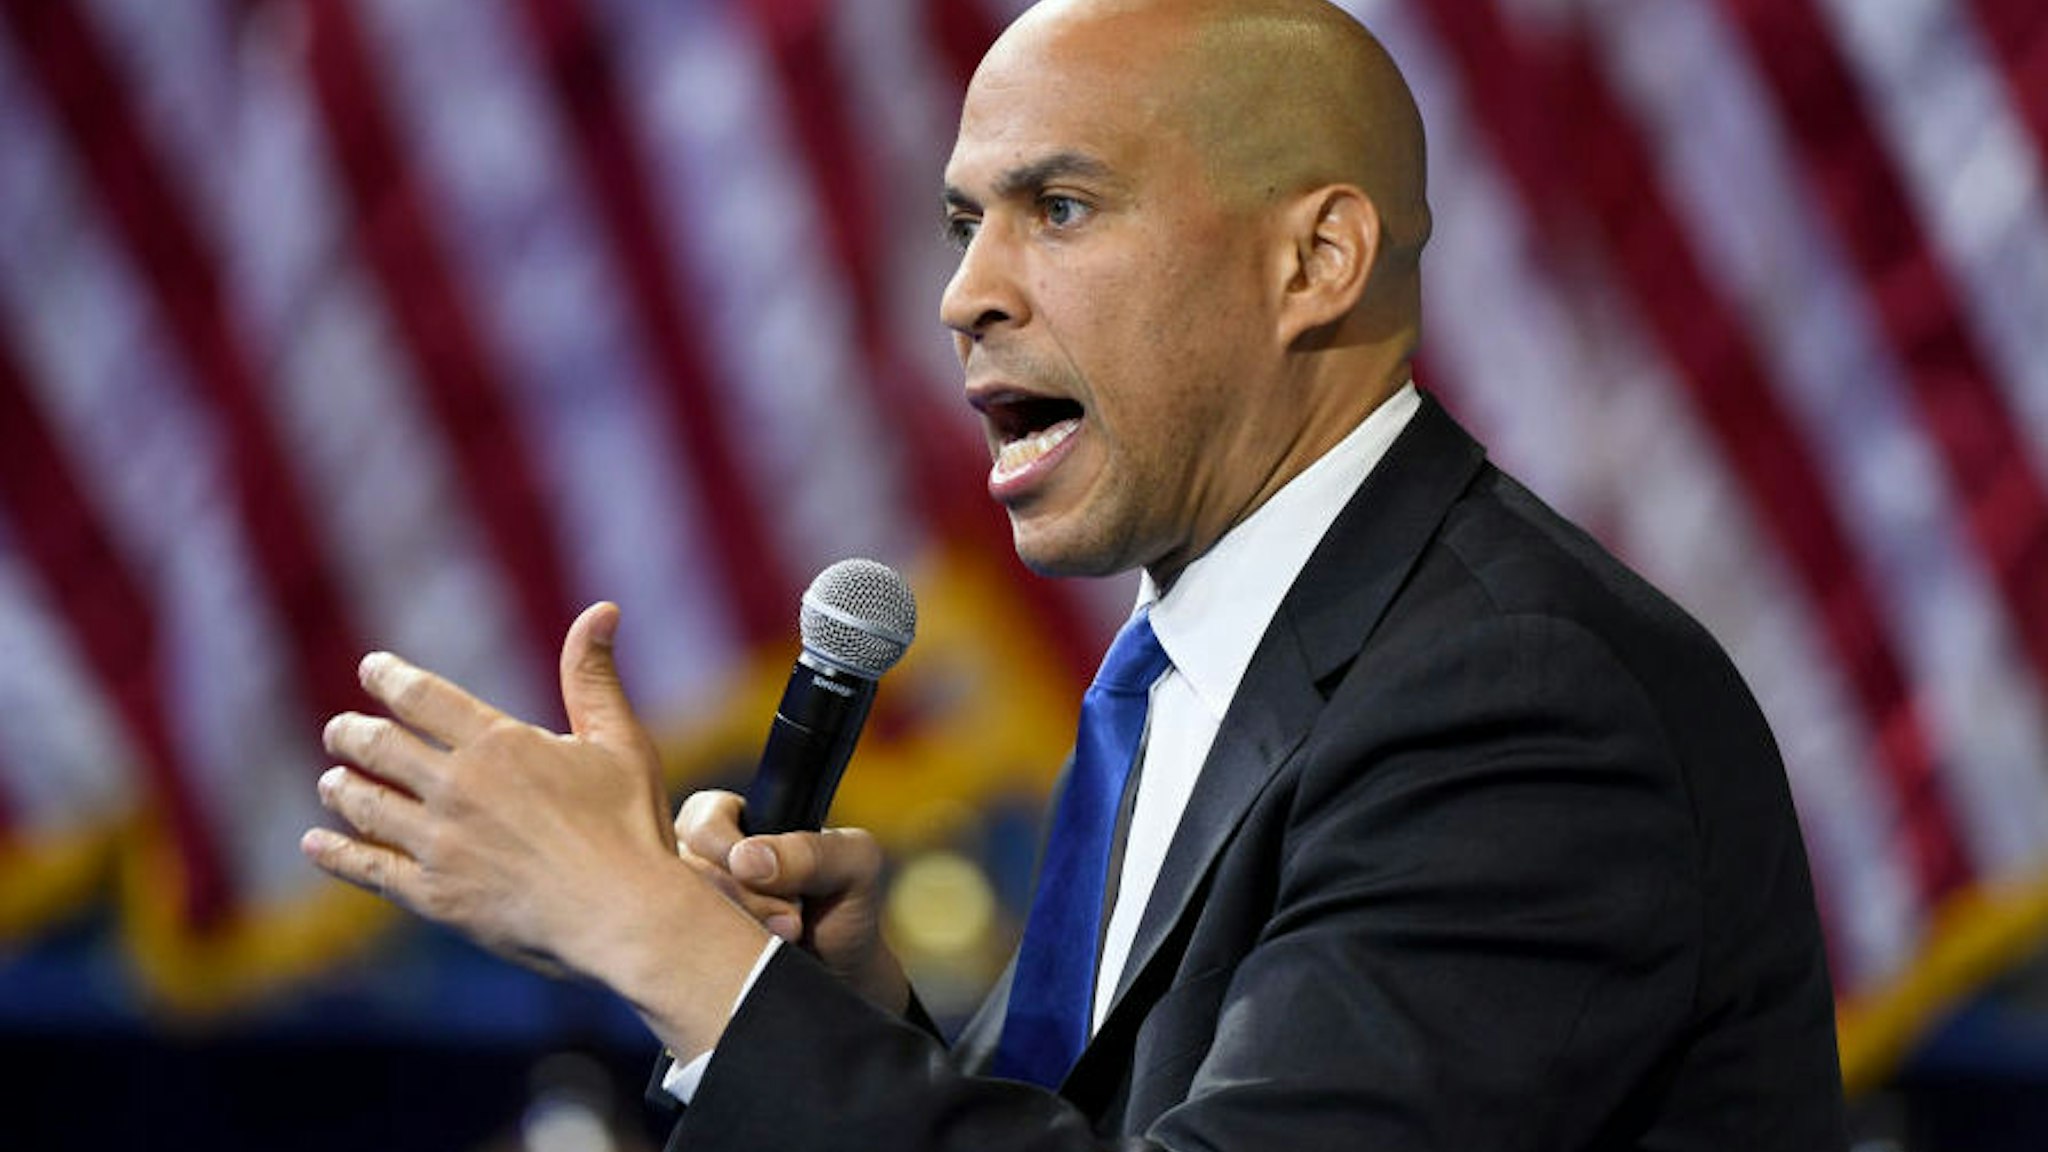 LAS VEGAS, NEVADA - OCTOBER 02: Democratic presidential candidate and U.S. Sen. Cory Booker (D-NJ) speaks during the 2020 Gun Safety Forum hosted by gun control activist groups Giffords and March for Our Lives at Enclave on October 2, 2019 in Las Vegas, Nevada. Nine Democratic candidates are taking part in the forum to address gun violence one day after the second anniversary of the massacre at the Route 91 Harvest country music festival in Las Vegas when a gunman killed 58 people in the deadliest mass shooting in recent U.S. history.